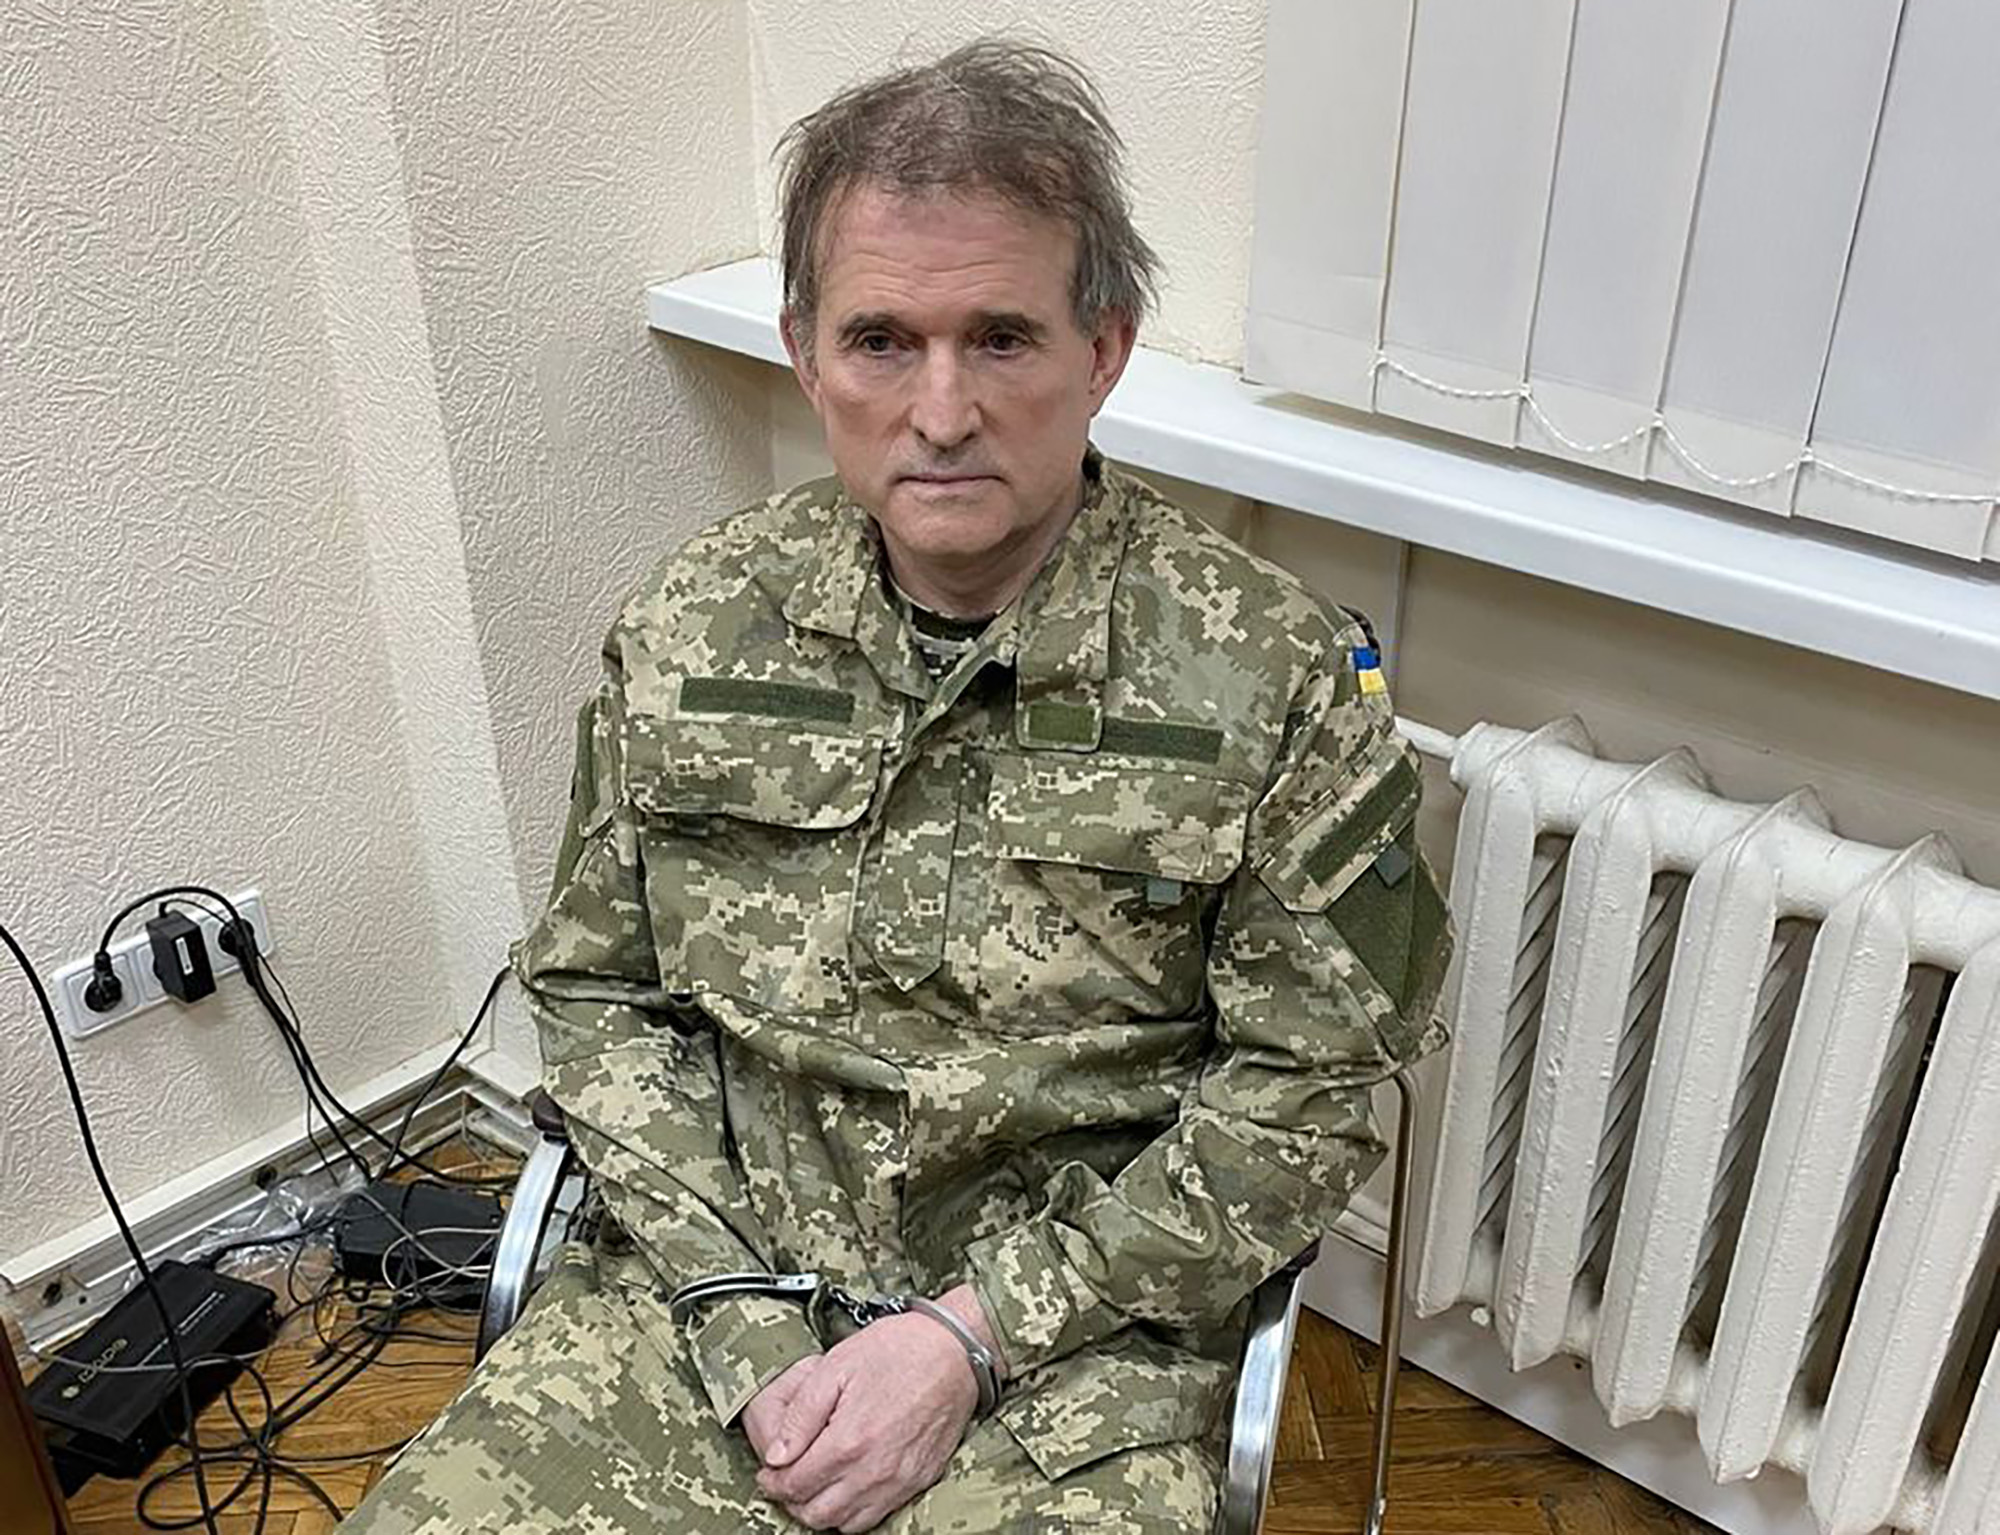 Fugitive oligarch Viktor Medvedchuk sits in a chair with his hands cuffed after a special operation by Ukrainian security services on April 12.